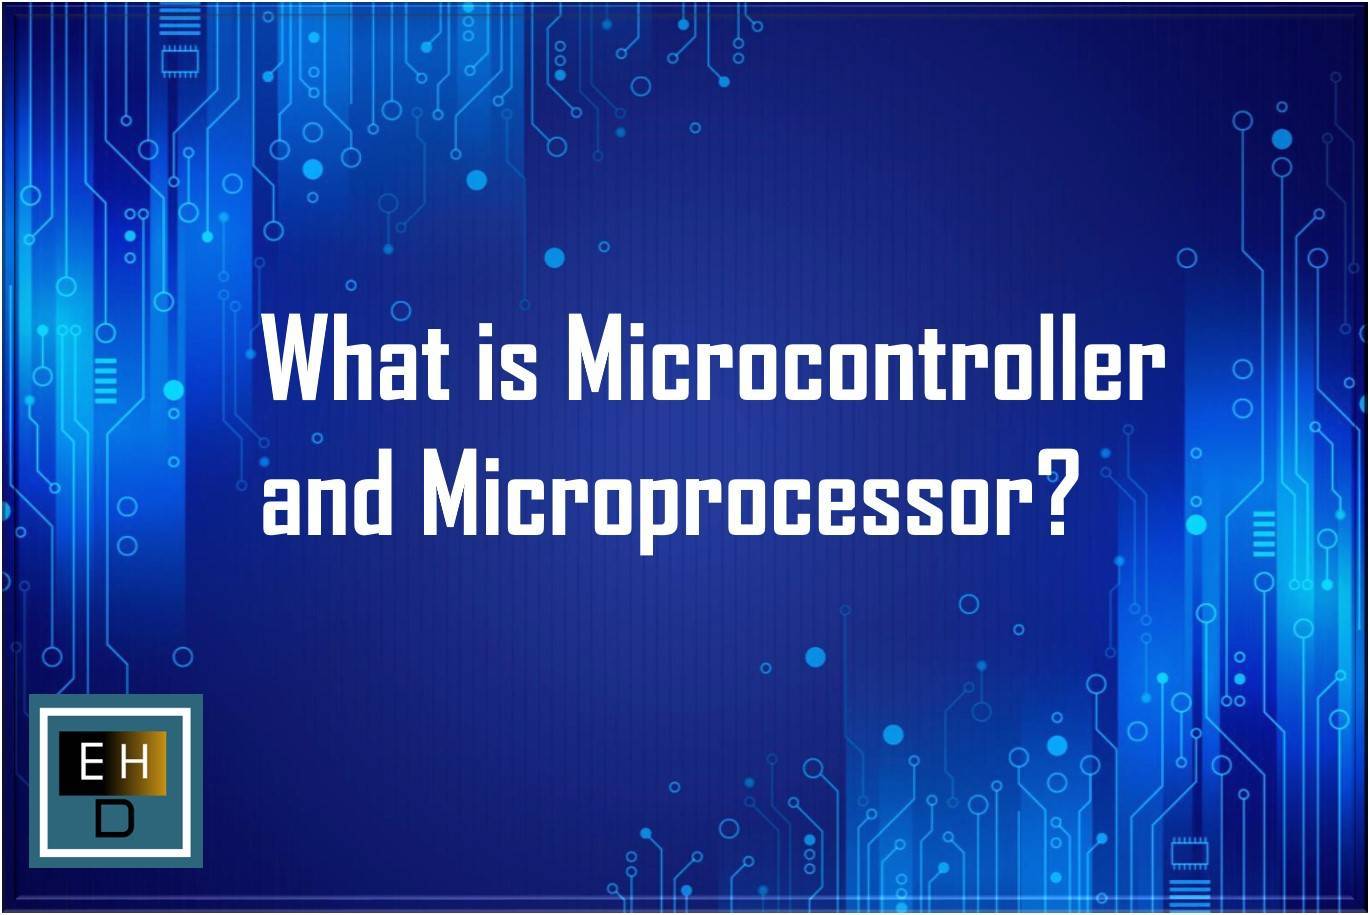 What is Microcontroller and Microprocessor?